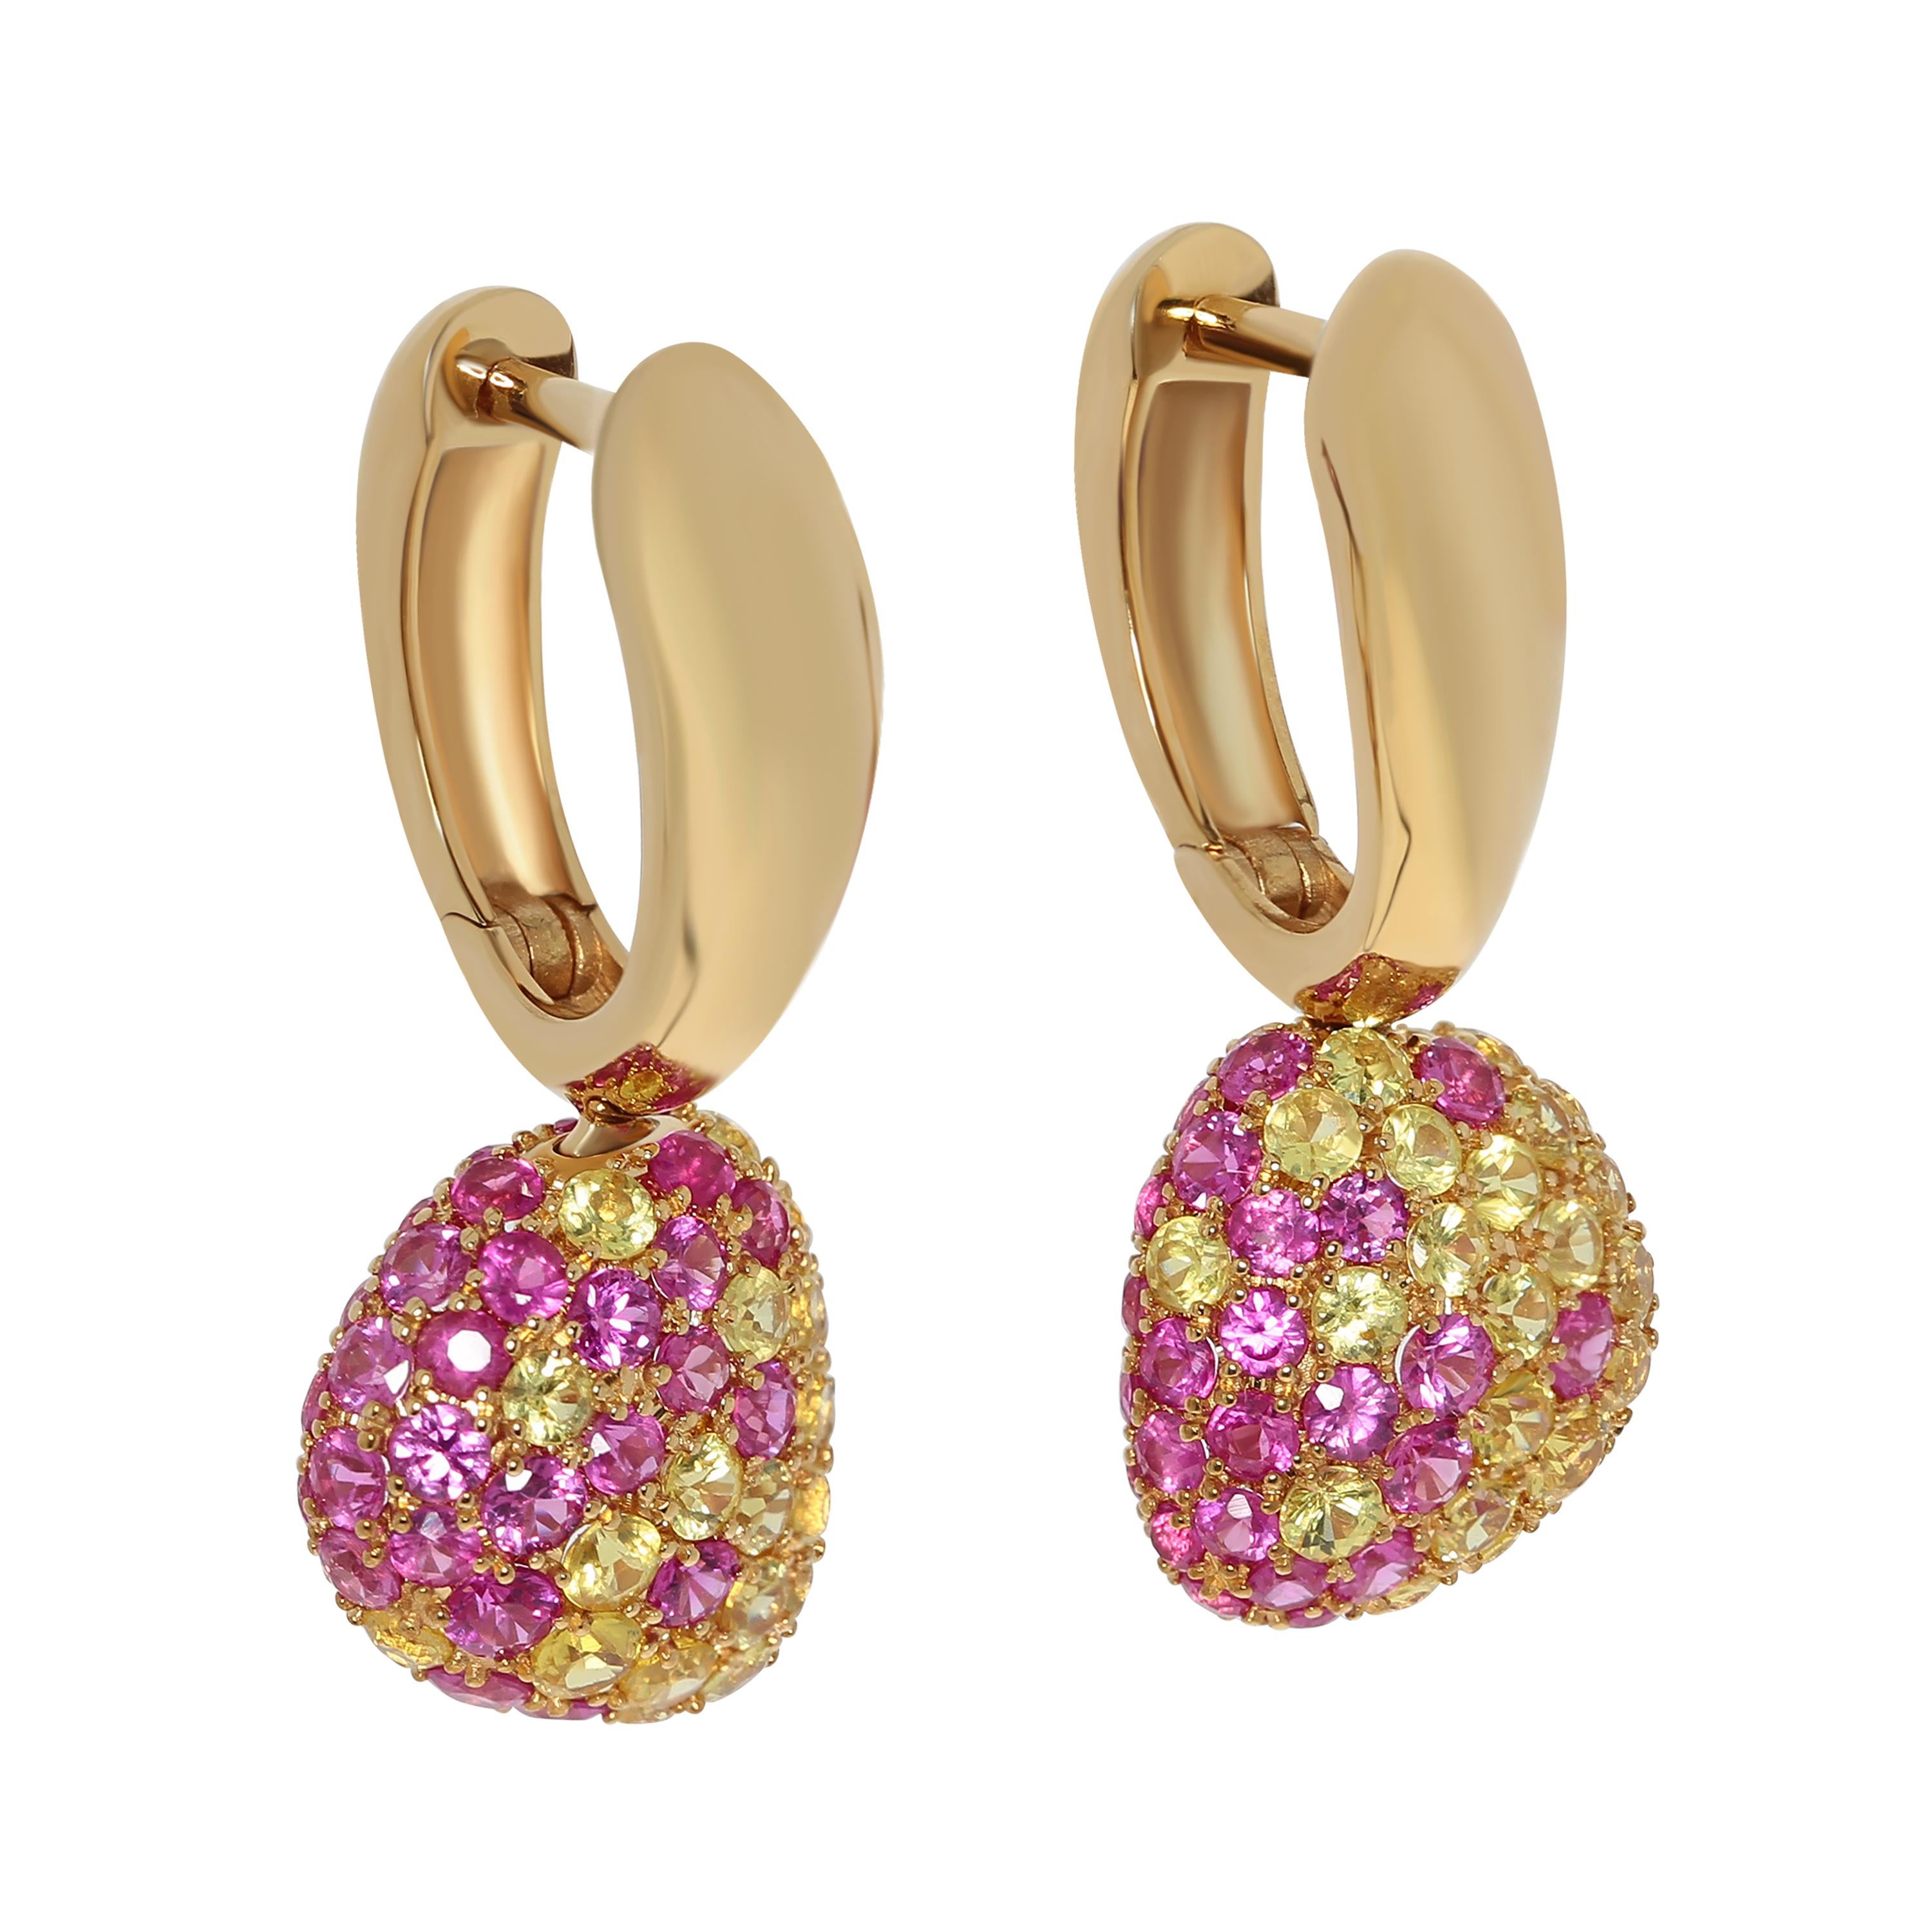 Yellow and Orange Sapphires Yellow 18 Karat Gold Riviera Earrings
The name and the variety of colours in this collection are associated with the bright Italian and French Riviera, vivid and colourful houses and sun reflections on the water. A place